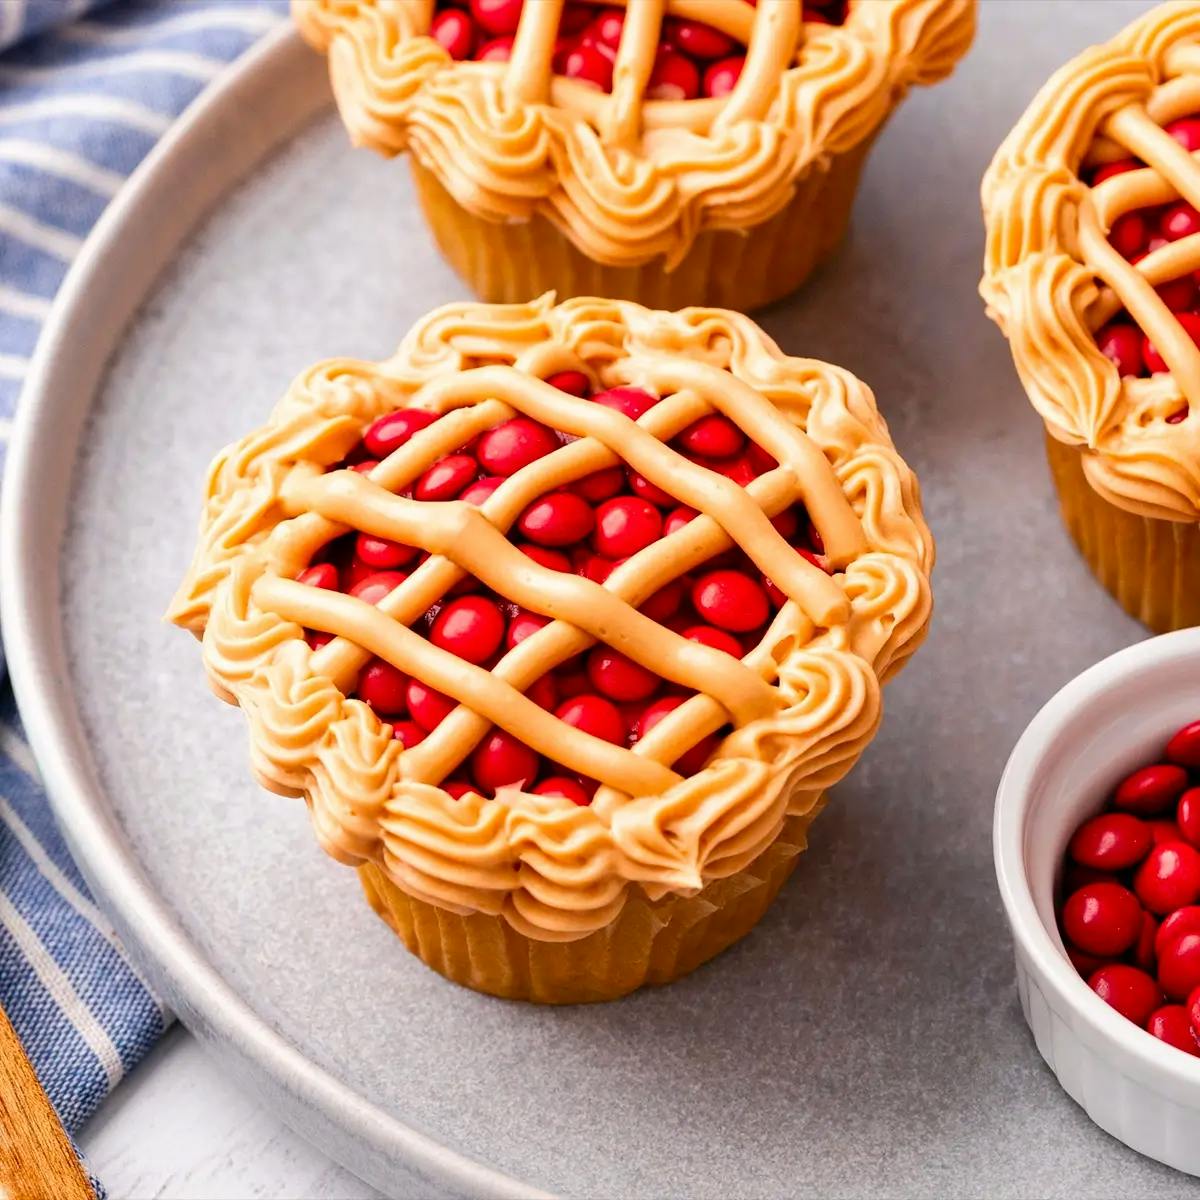 Cupcake topped with red M&Ms and piped with a lattice frosted crust that looks just like a mini cherry pie.